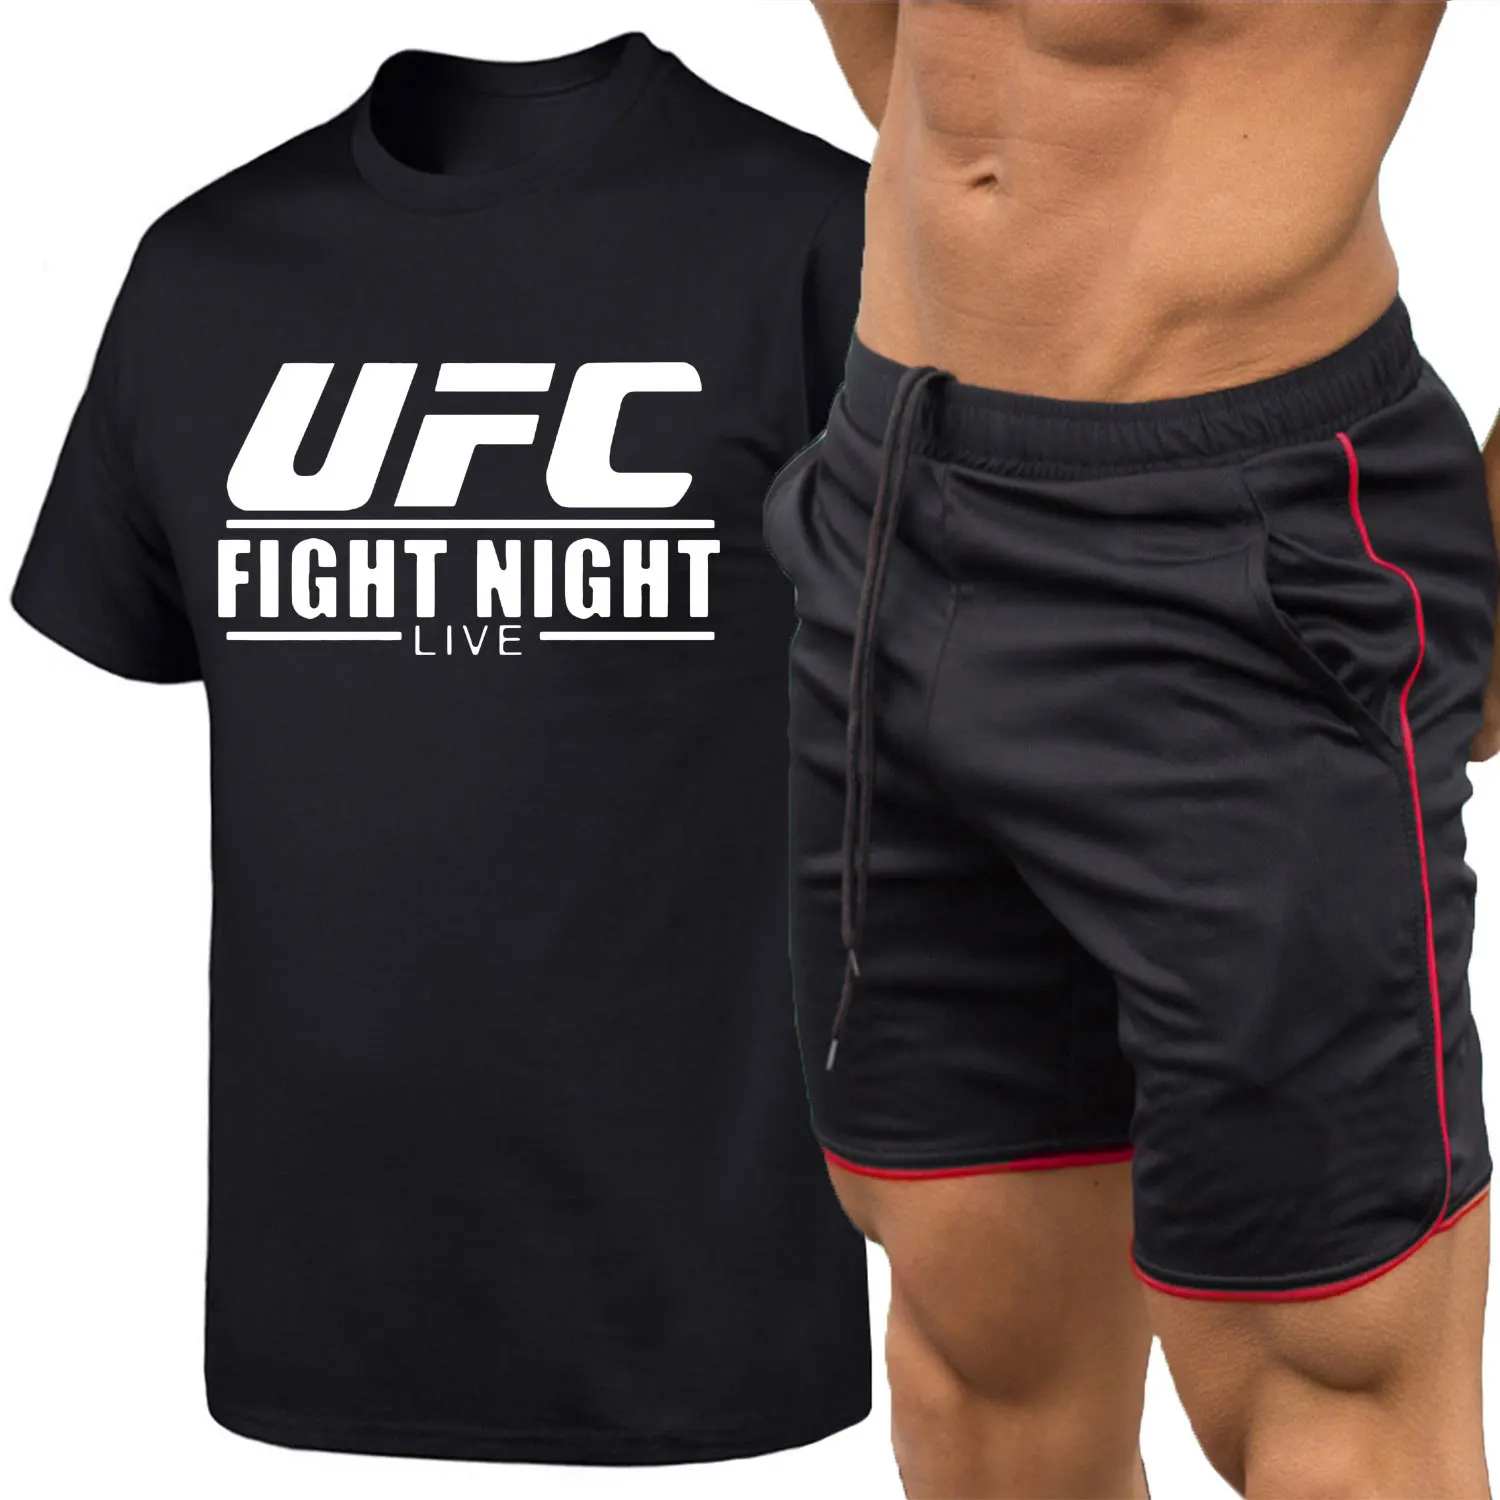 Mma ufc Europe And America Fighting Extreme Fighting Short Sleeve Casual MEN'S T-shirt+ Sports Shorts Set